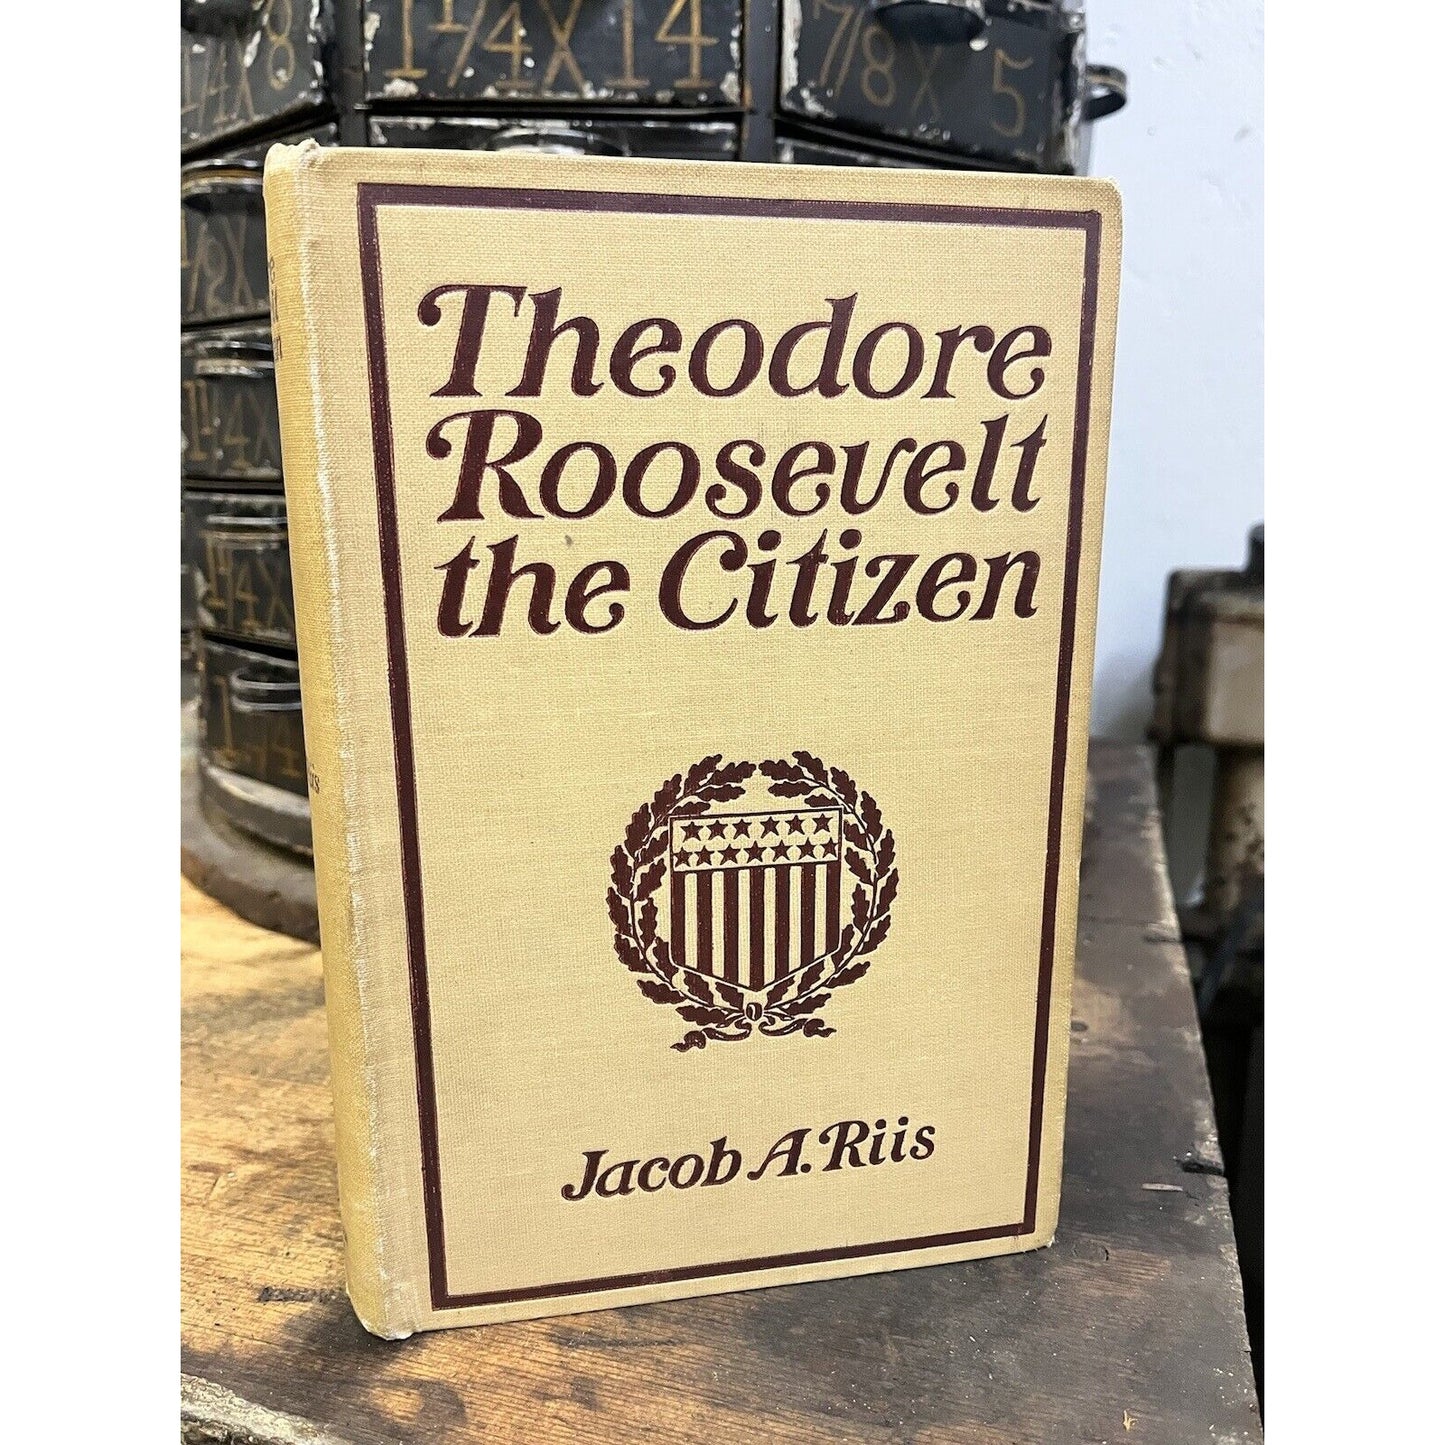 Antique 1904 Theodore Roosevelt the Citizen Hardcover Book Biography Jacob Riis